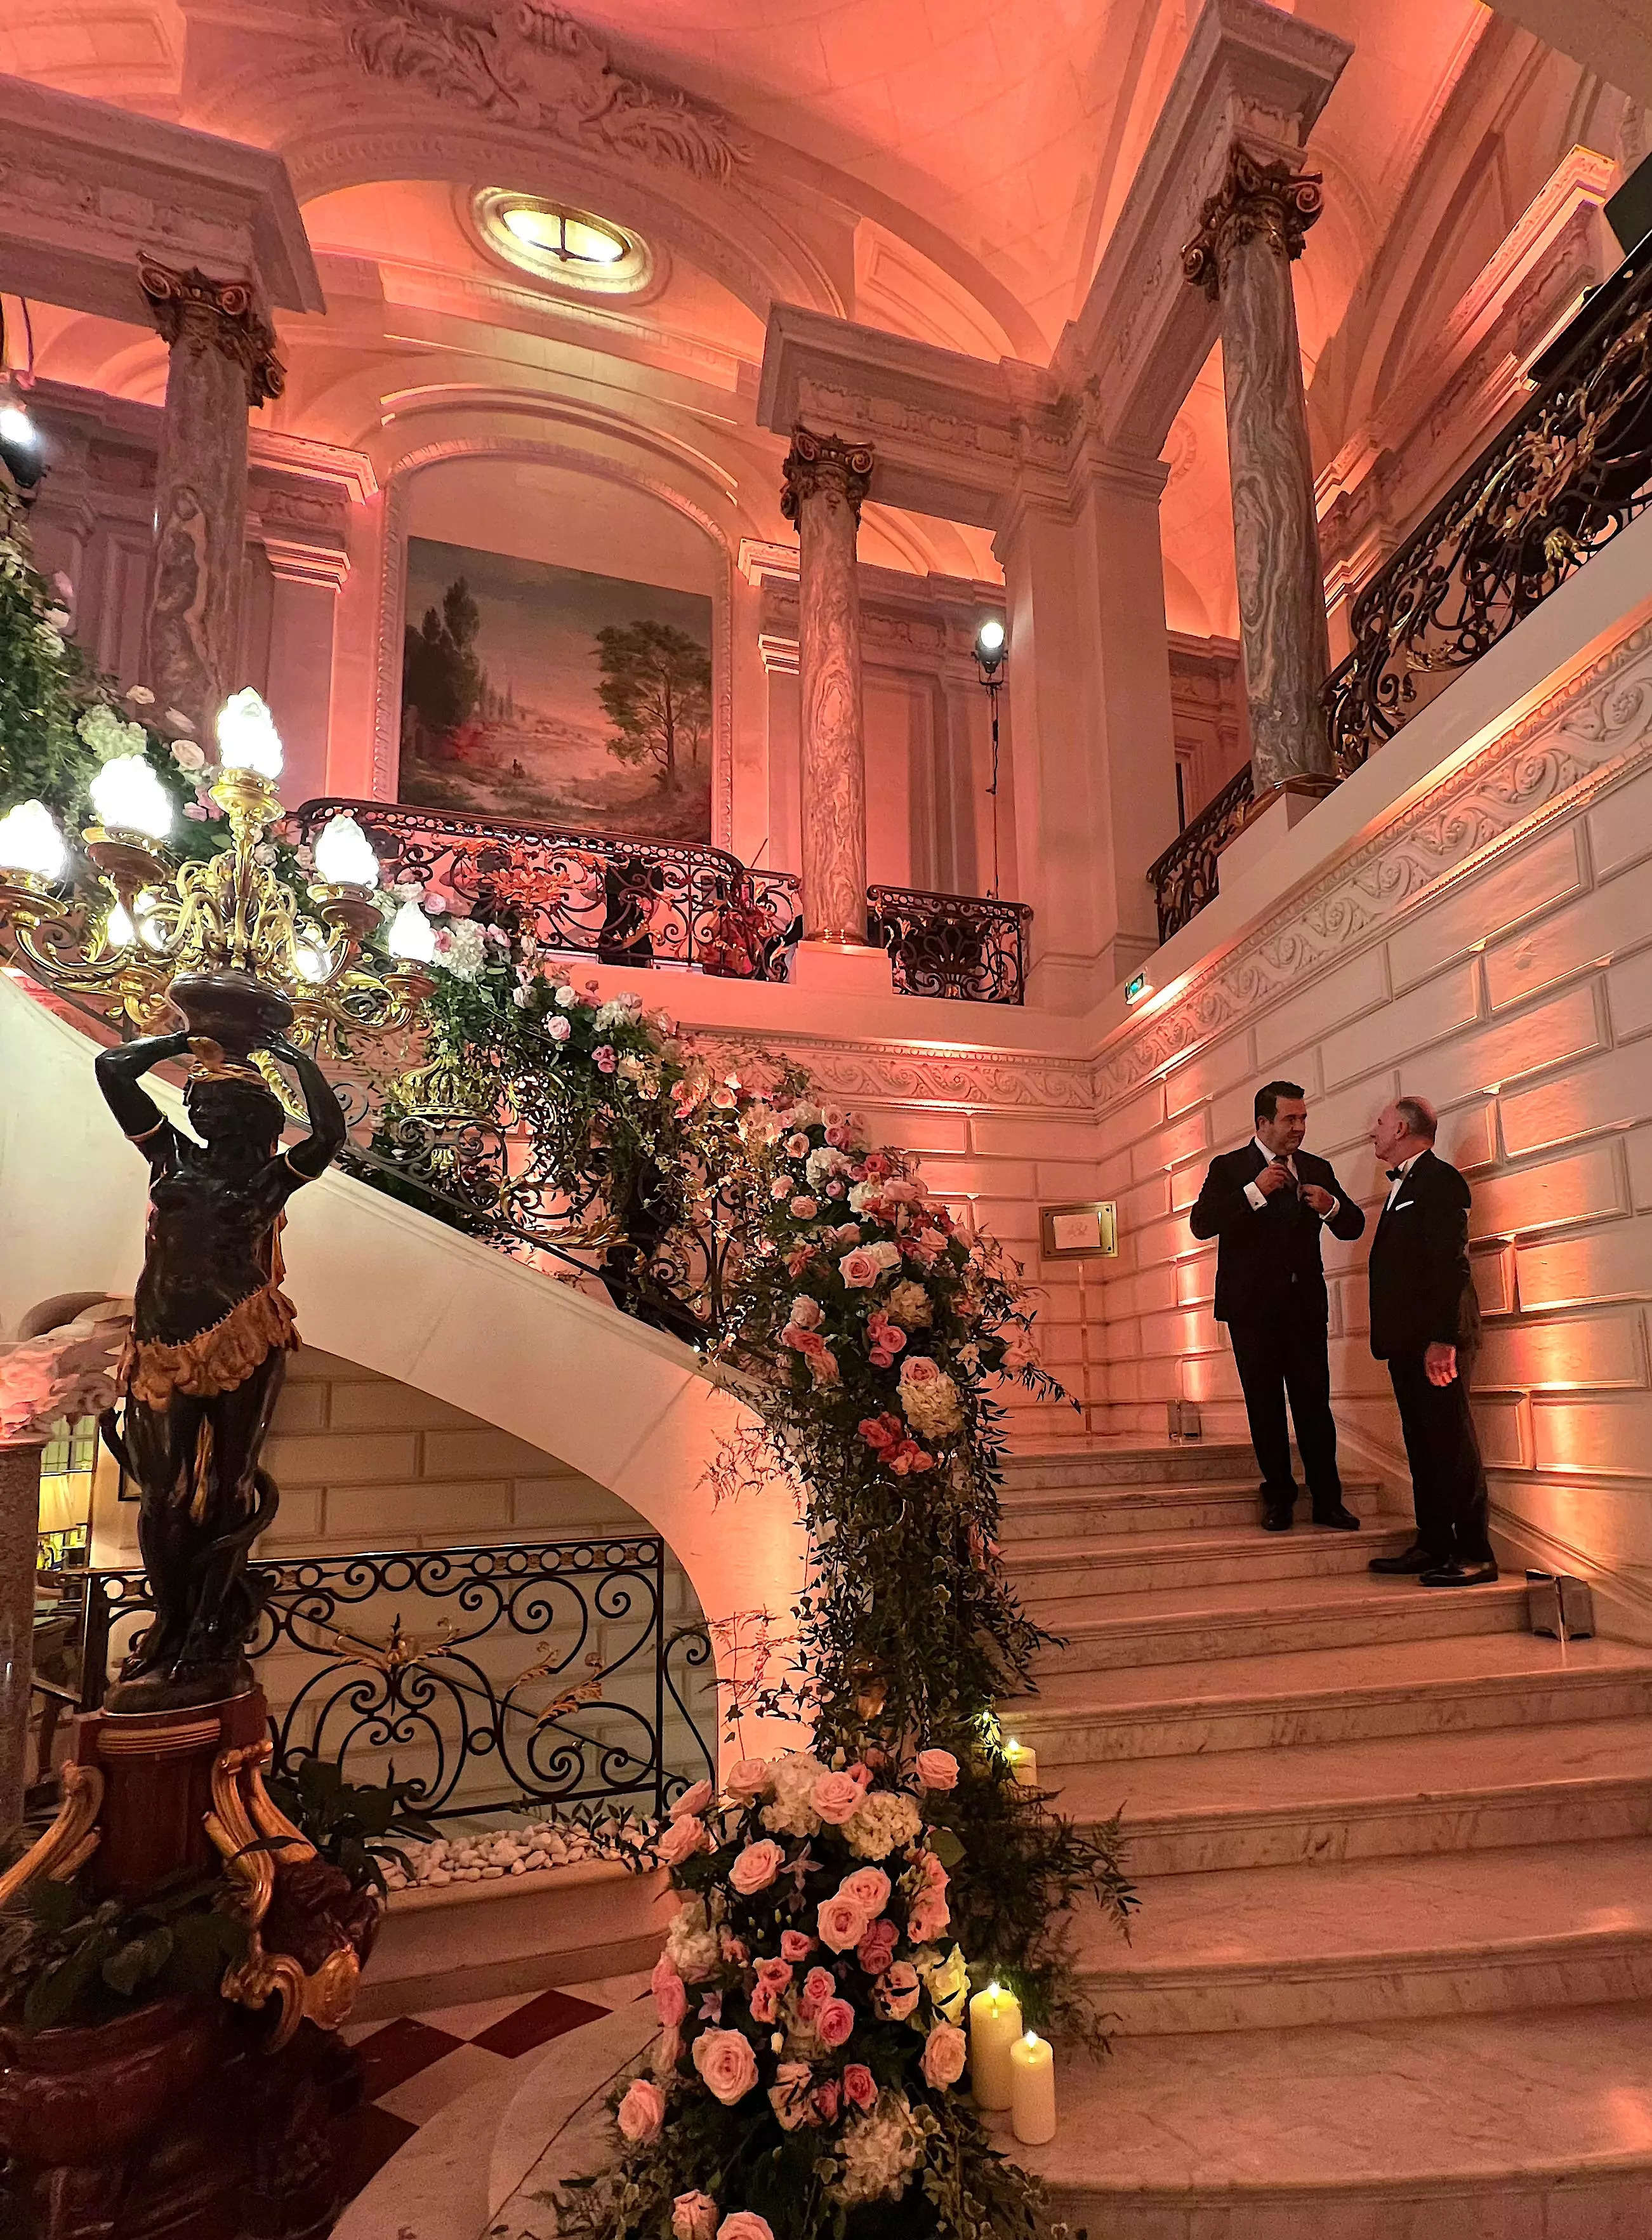 The hotel was decorated with florals on the evening of Le Bal.